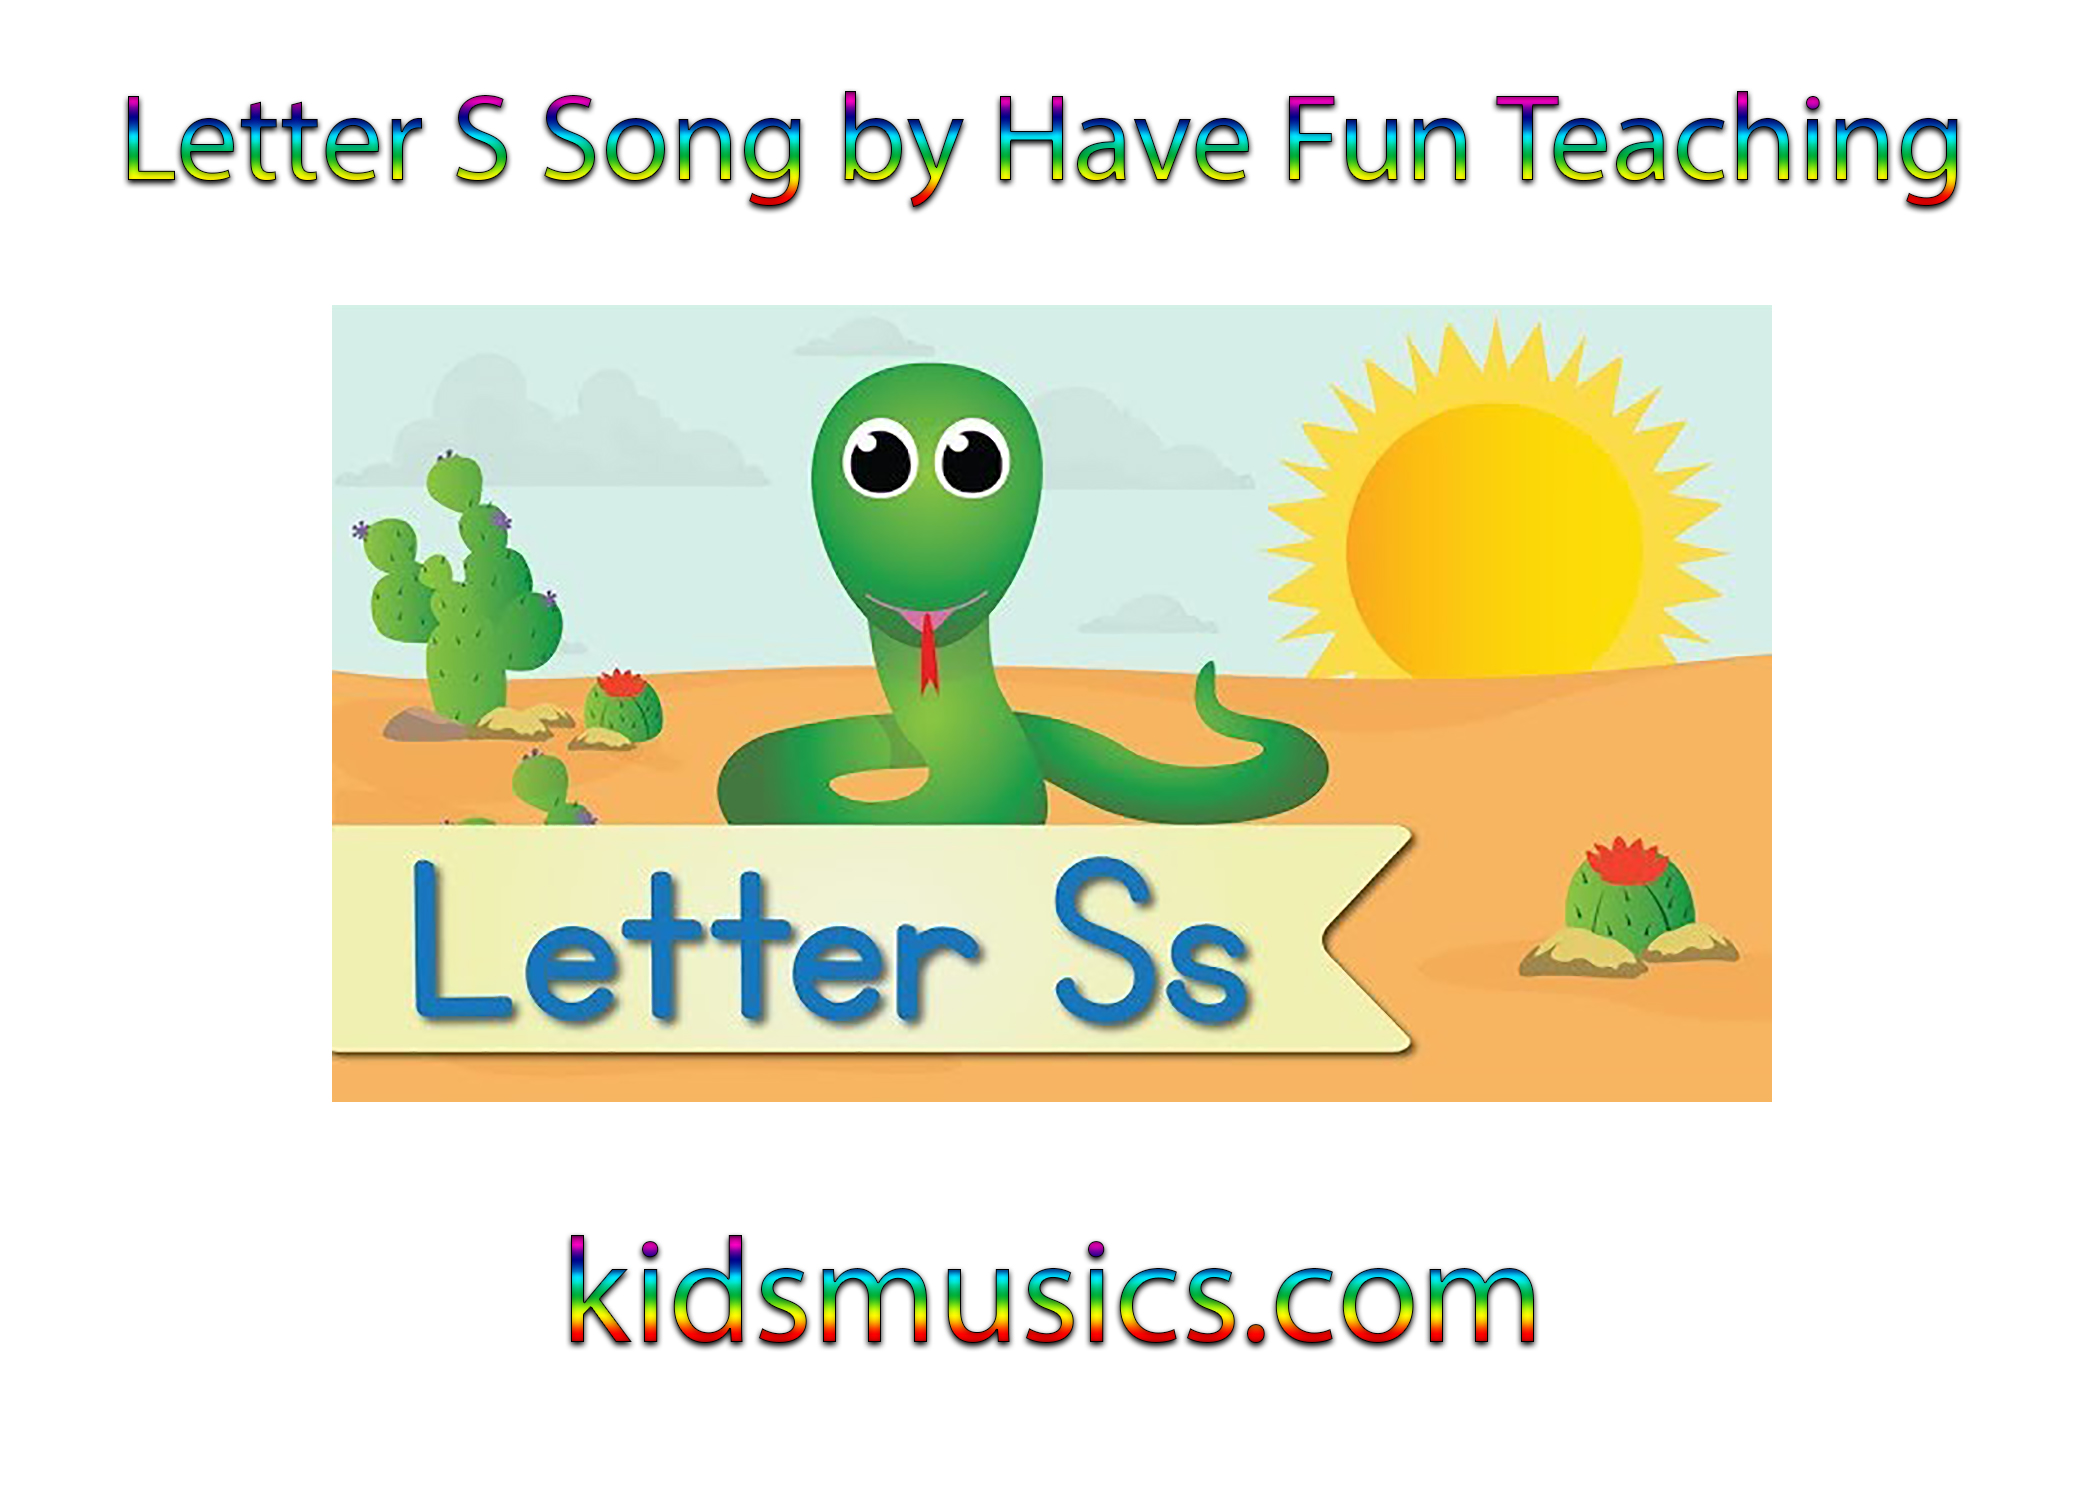 Letter S Song by Have Fun Teaching